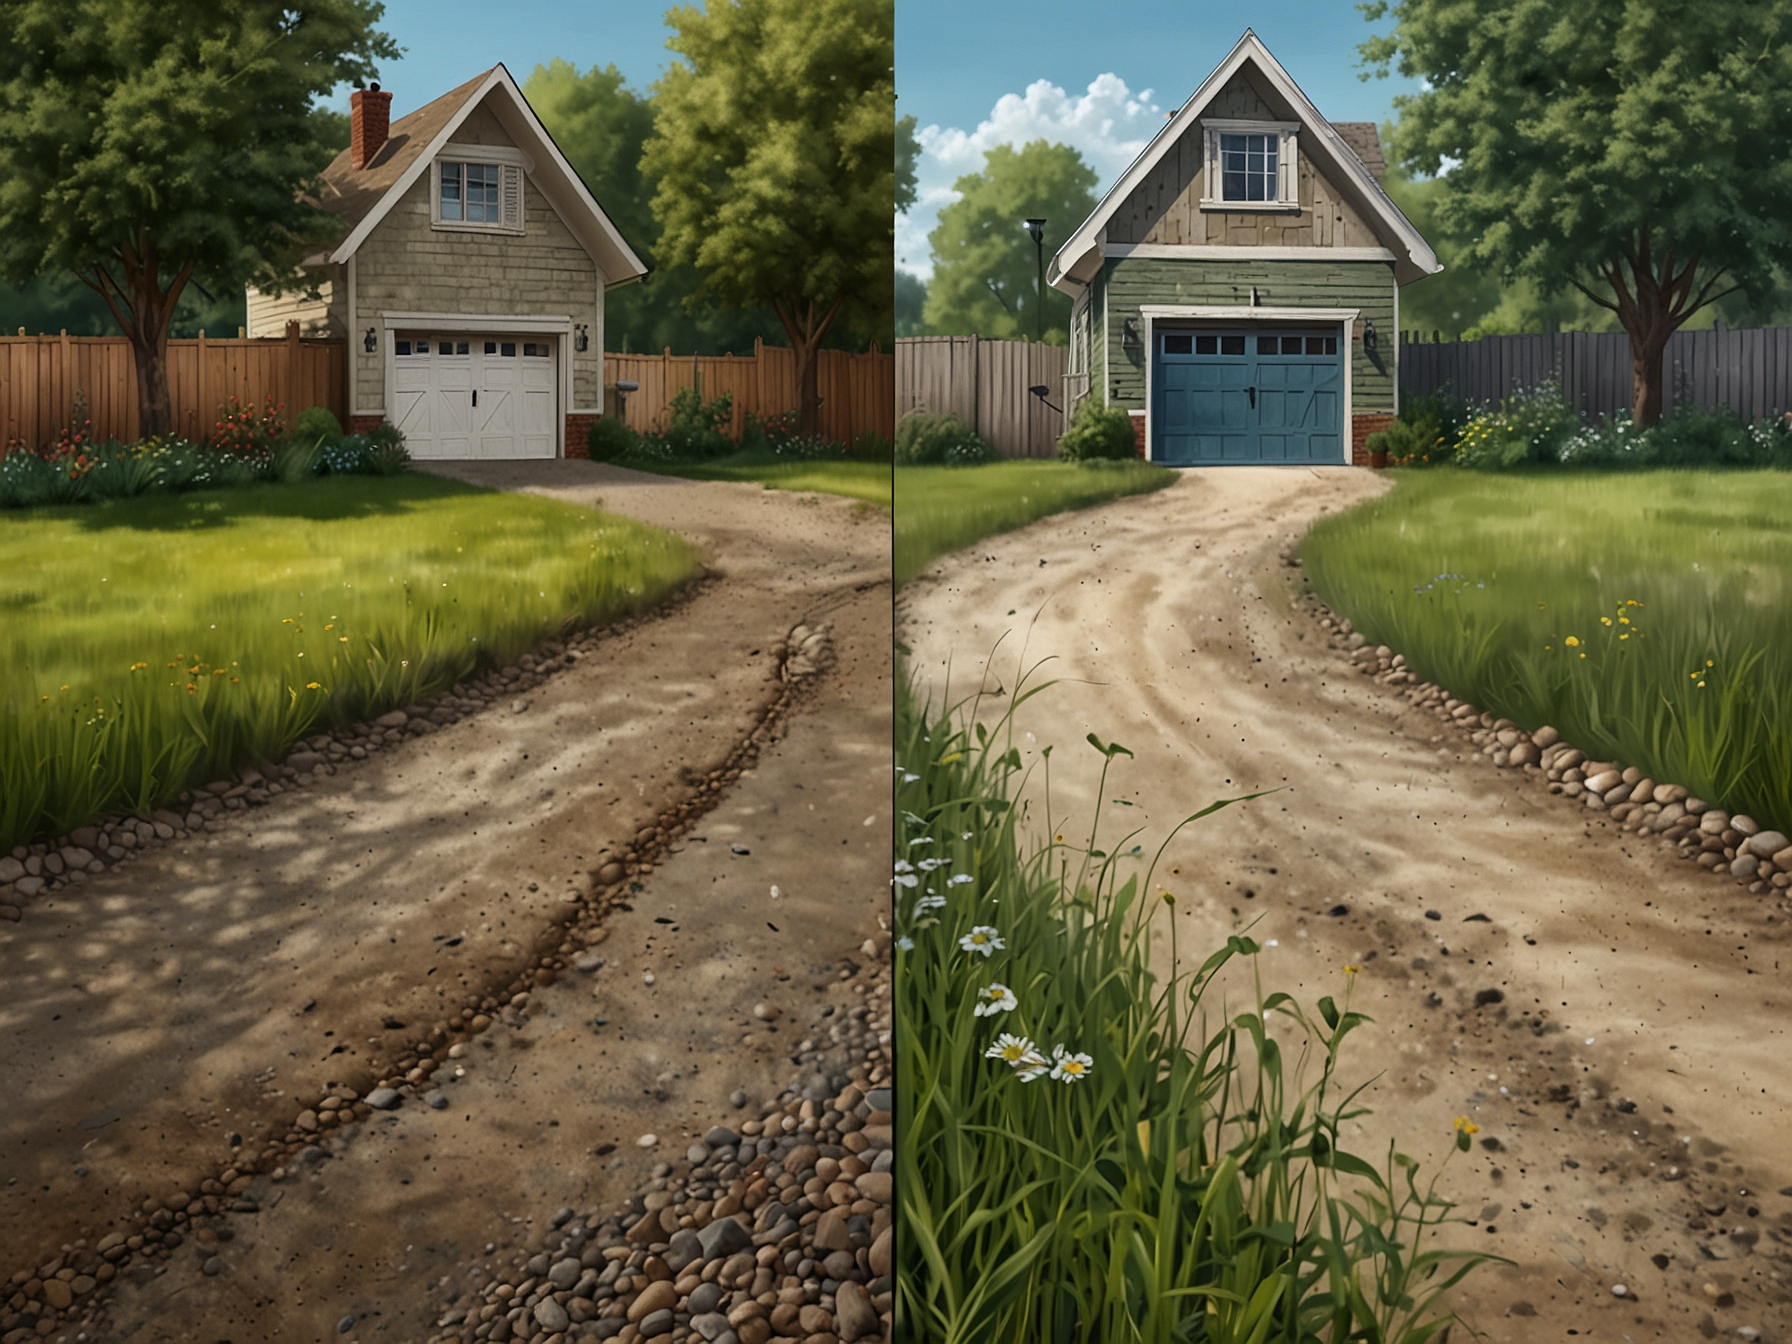 A before-and-after comparison of a gravel driveway with weeds and the same area after treating with boiling water, demonstrating the effectiveness in achieving a weed-free surface.